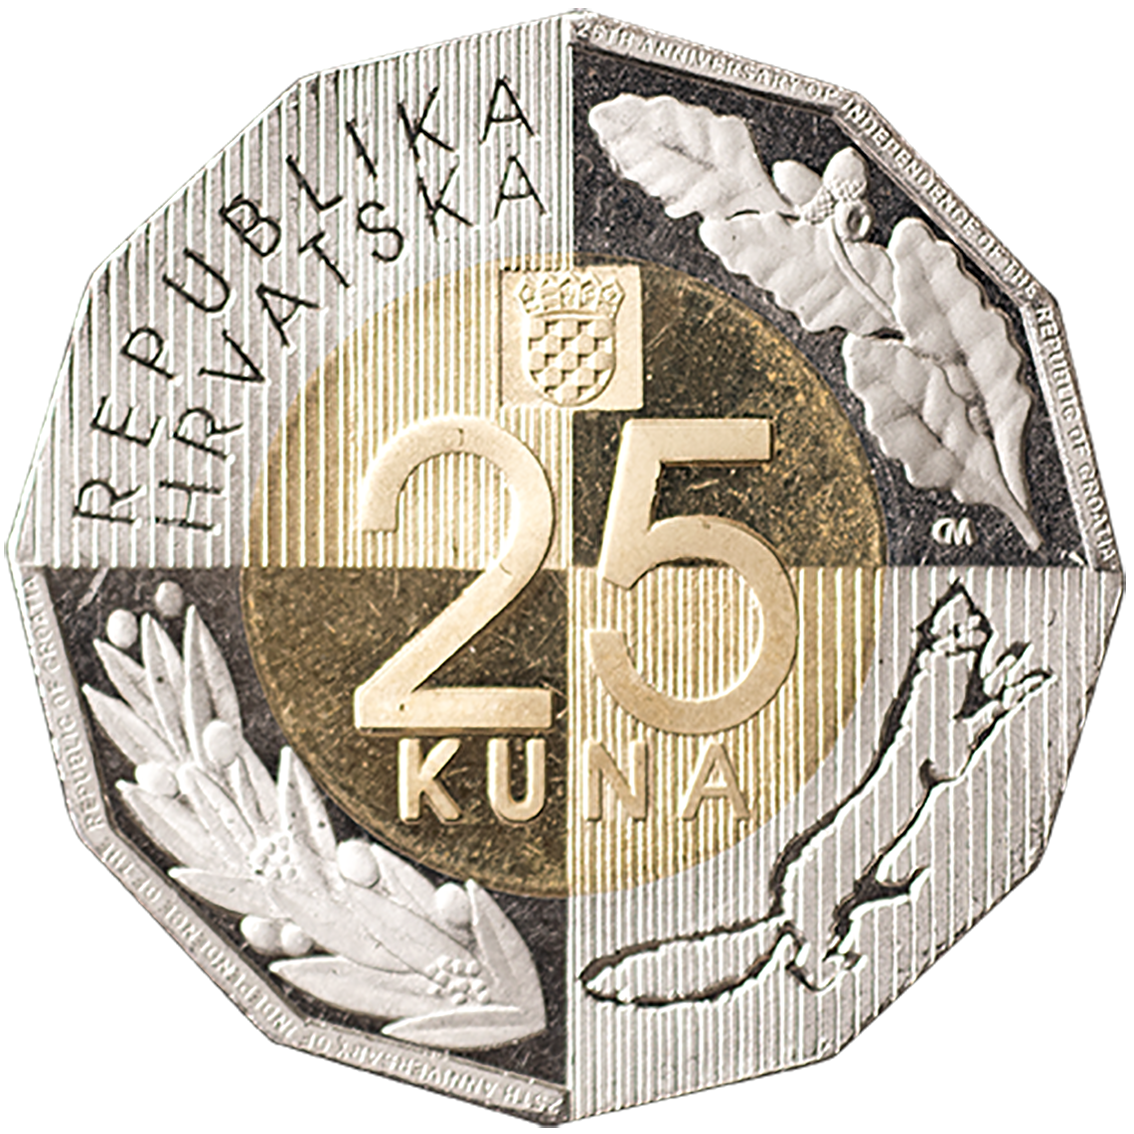 25 kuna – 25th Anniversary of Independence of the Republic of